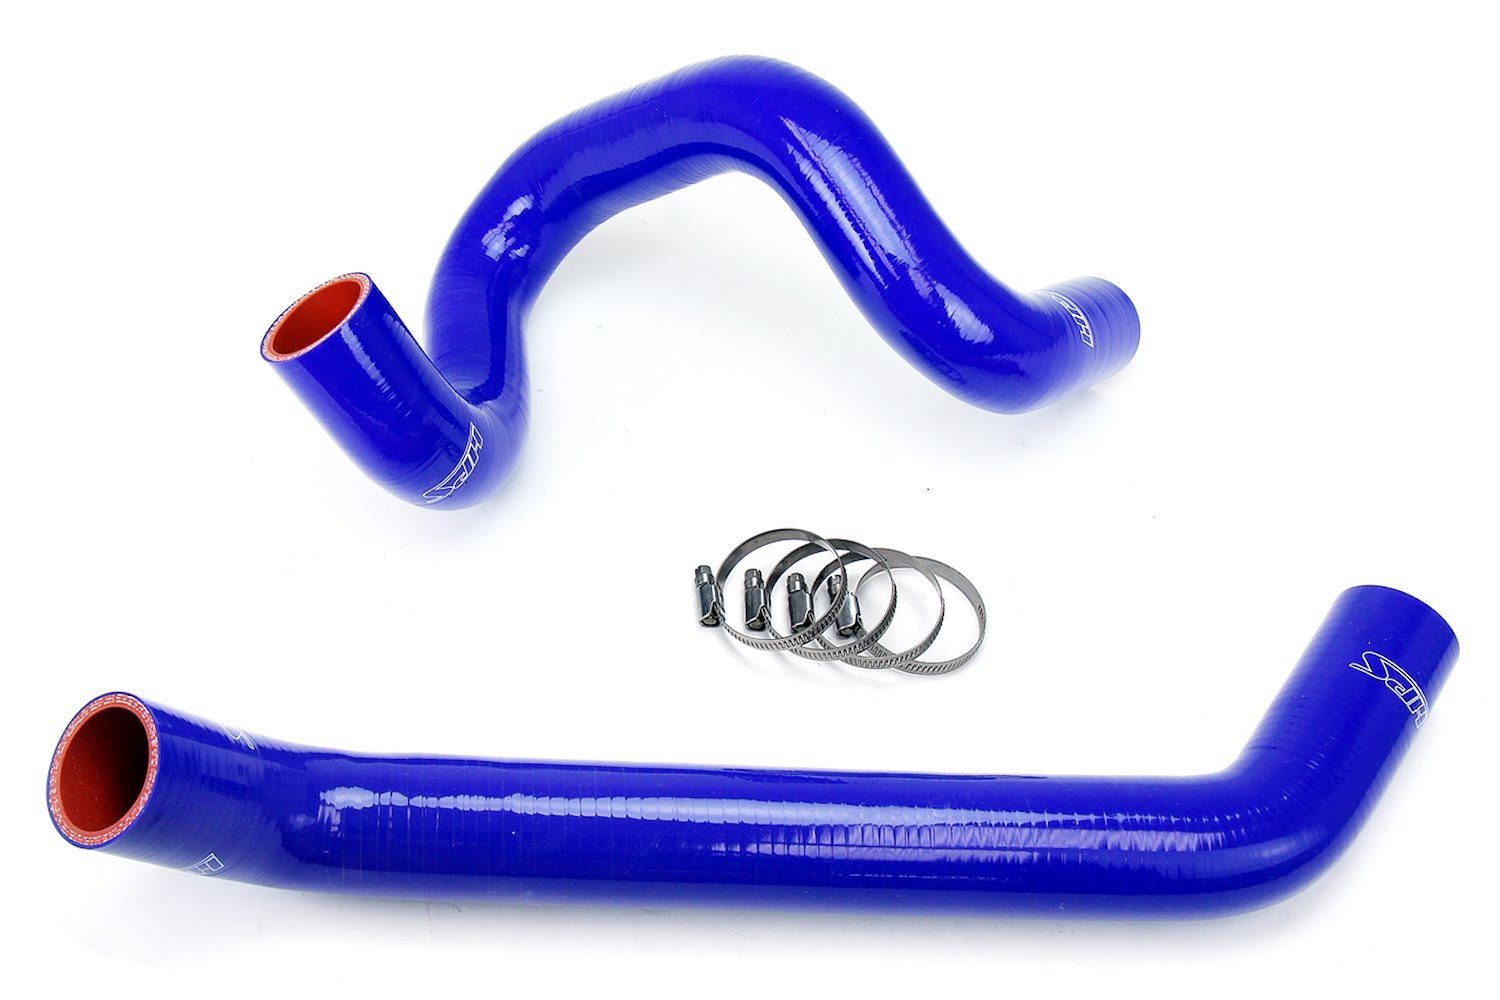 57-1220R-BLUE Radiator Hose Kit, High-Temp 3-Ply Reinforced Silicone, Replace OEM Rubber Radiator Coolant Hoses